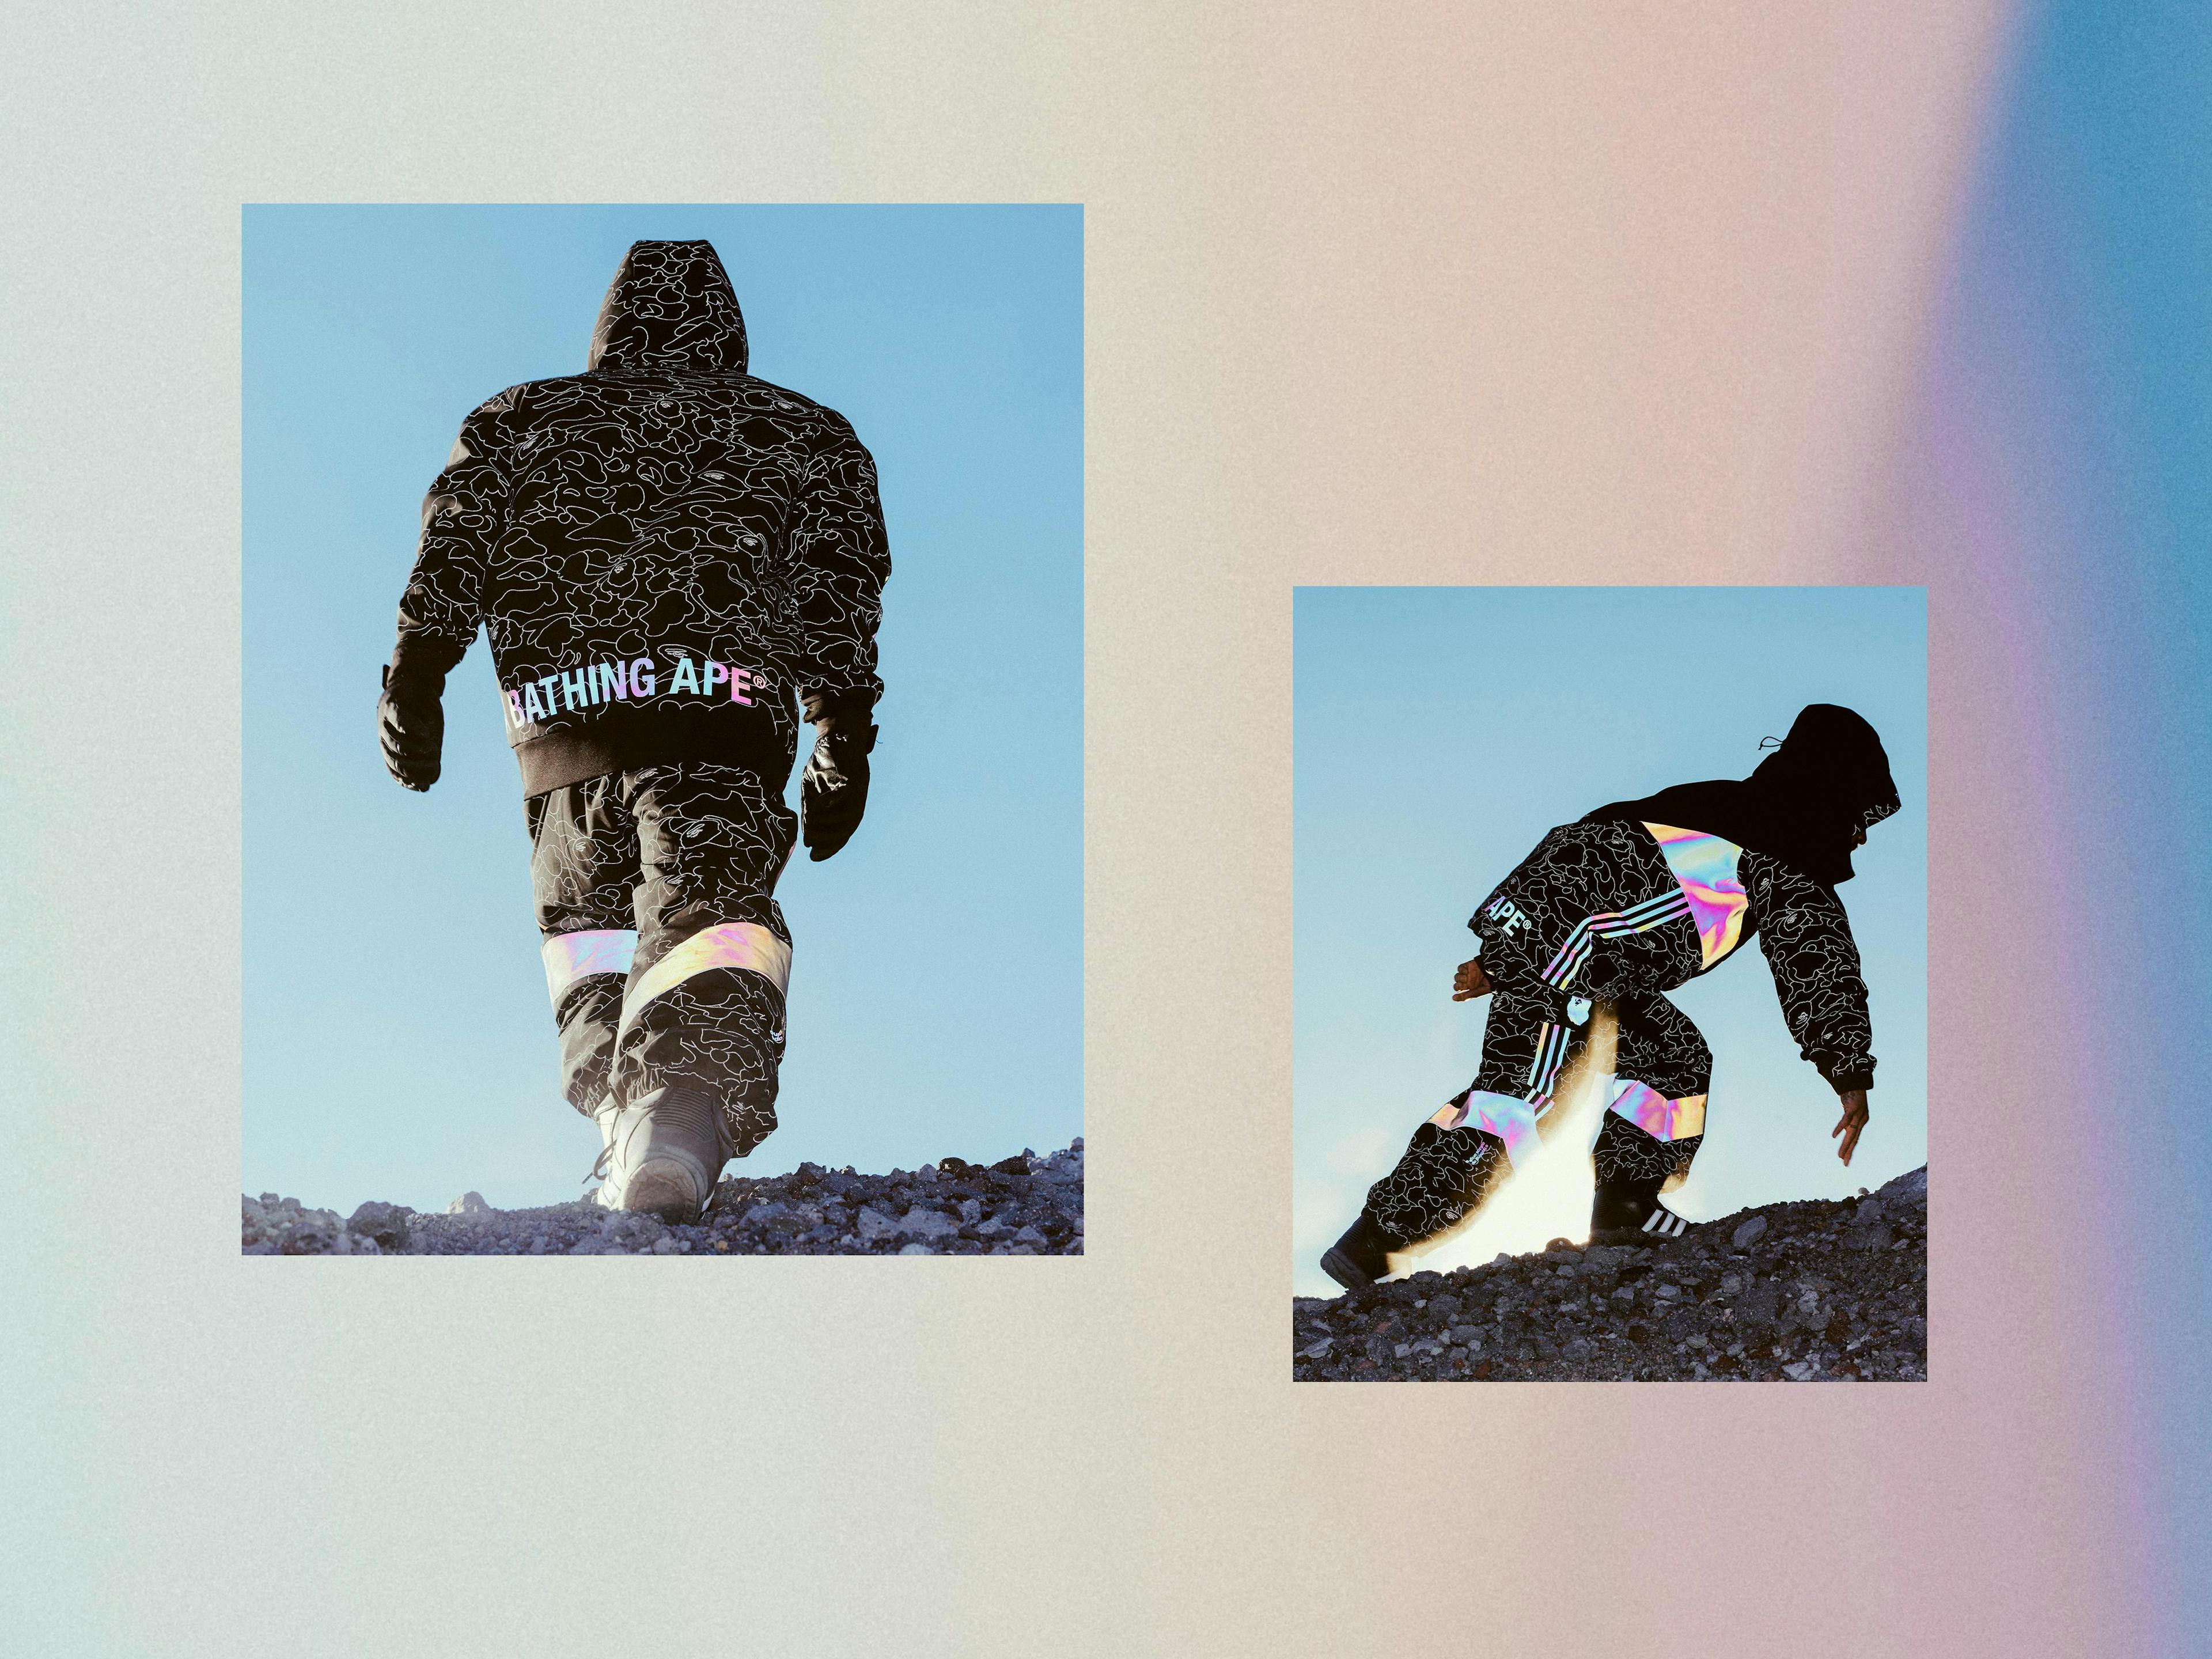 person human nature outdoors snowboarding sport snow collage advertisement poster